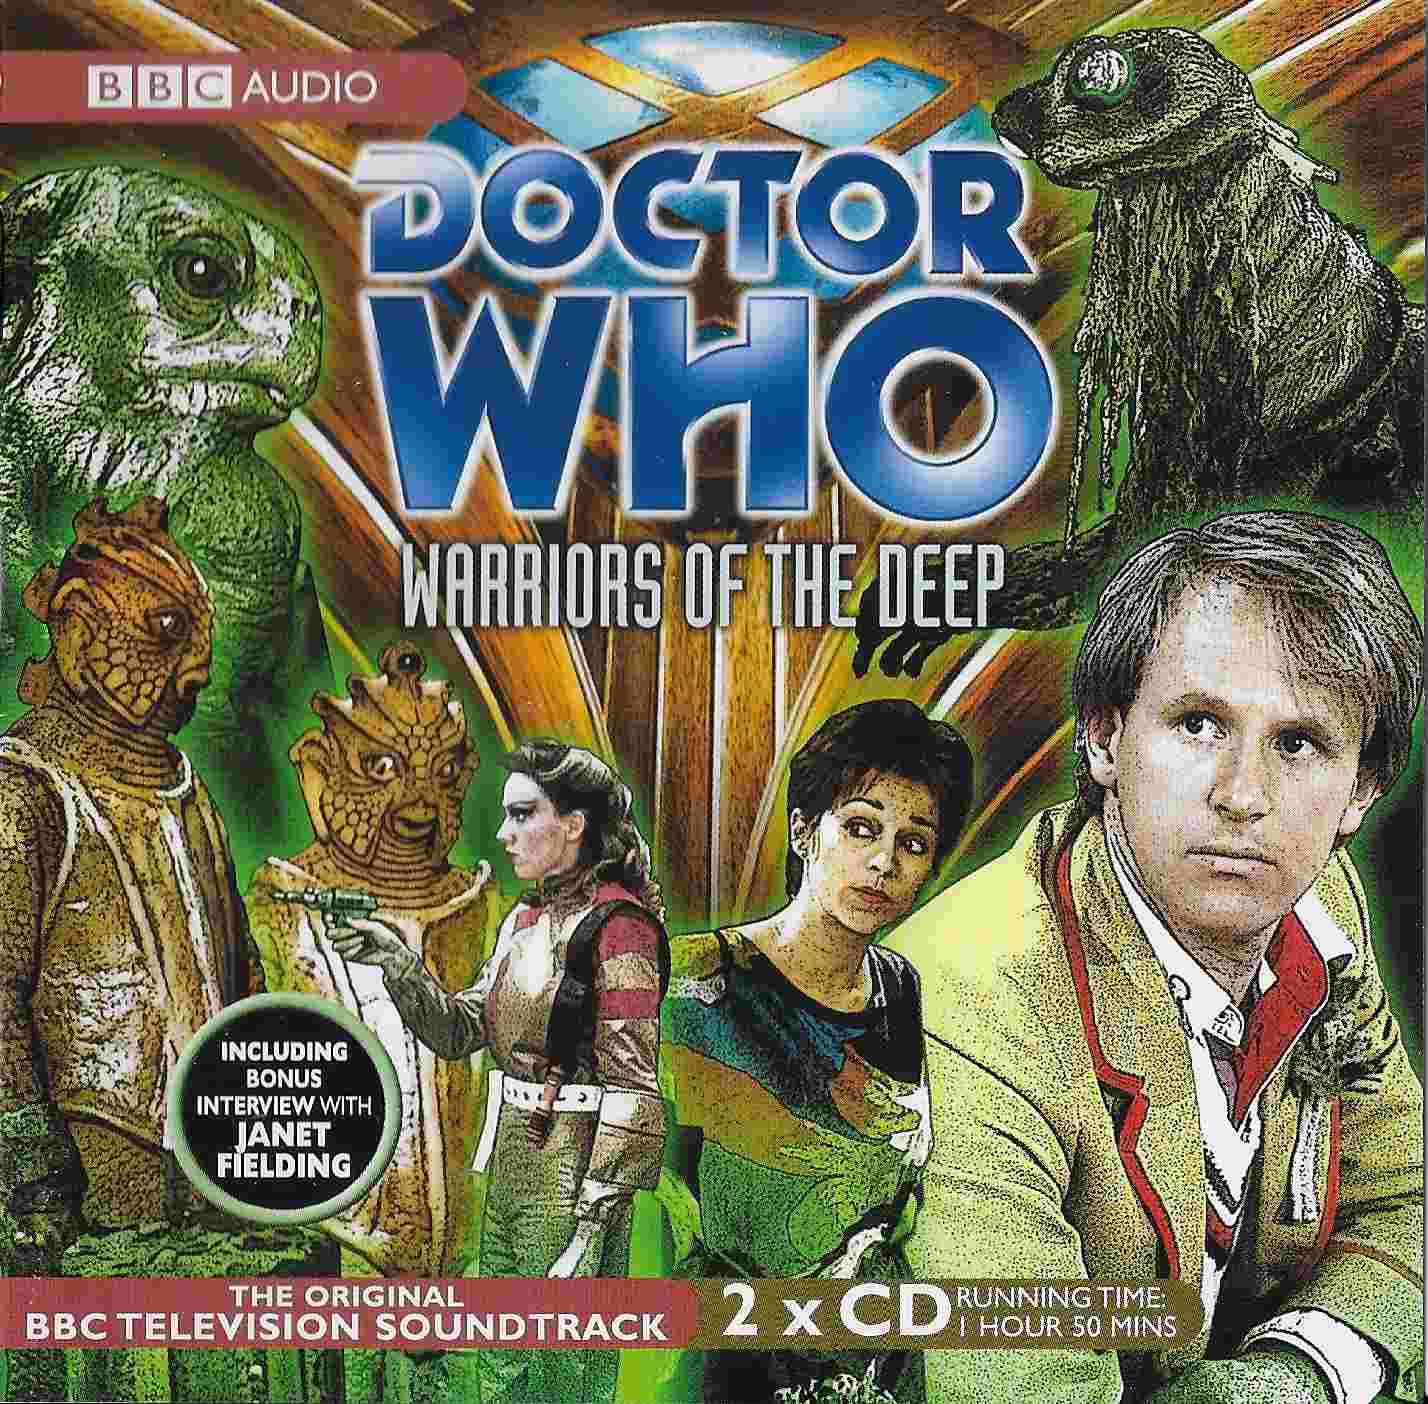 Picture of ISBN 1-4056-7738-4 Doctor Who - Warriors of the deep by artist Johnny Byrne from the BBC cds - Records and Tapes library